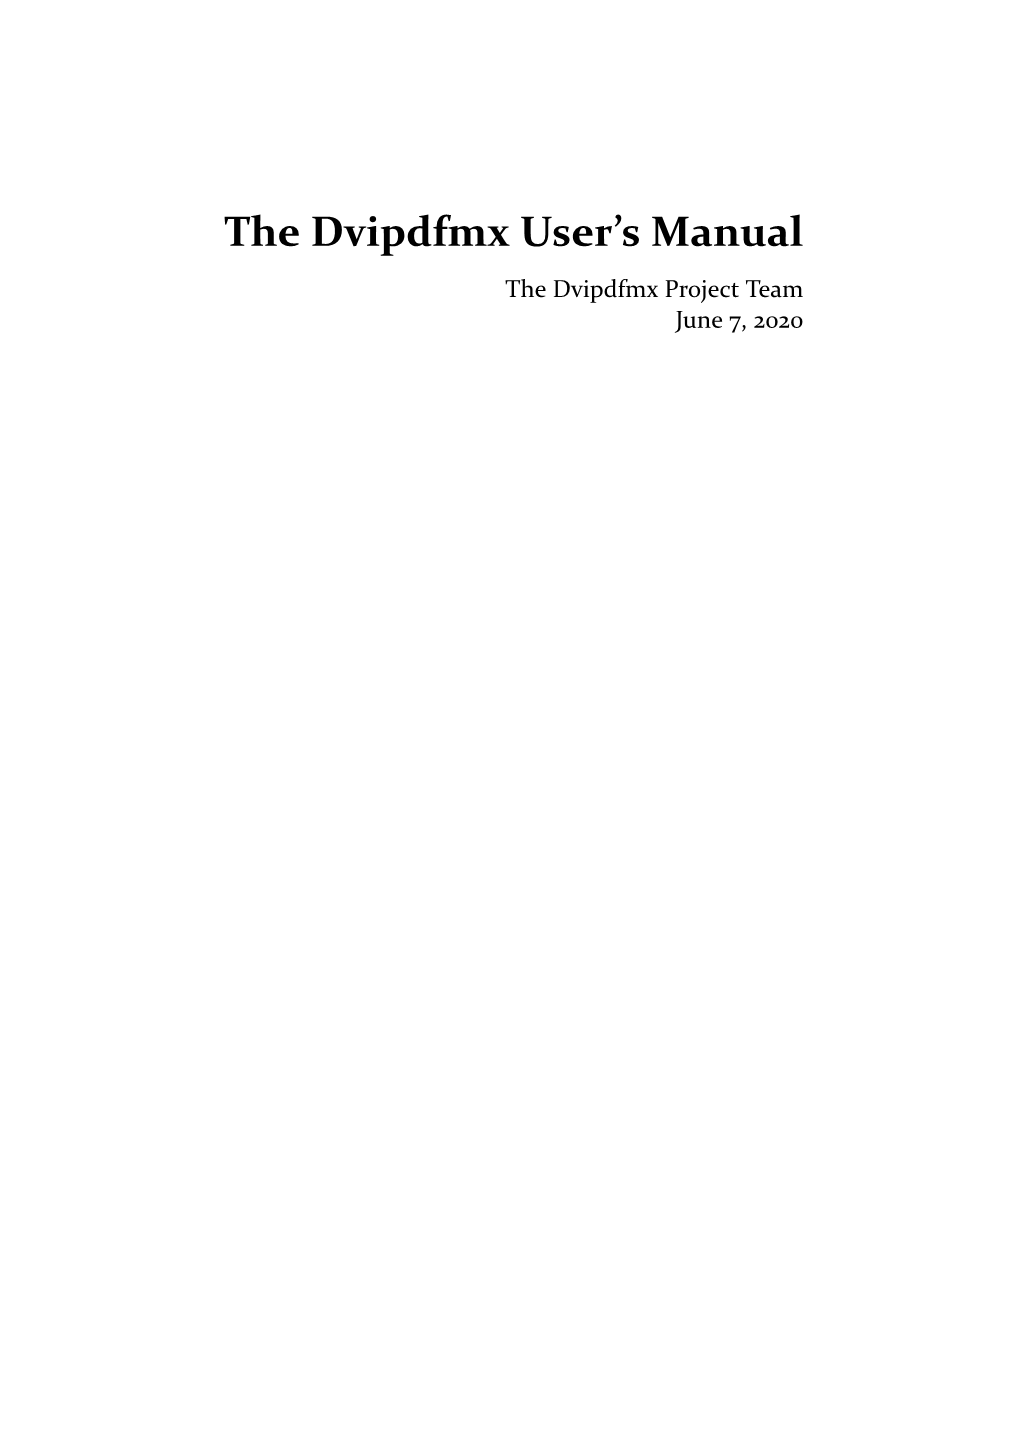 The Dvipdfmx User's Manual) /Subj (The Dvipdfmx User's Manual) /Contents (Xelatex Source File of the Manual.) >> }